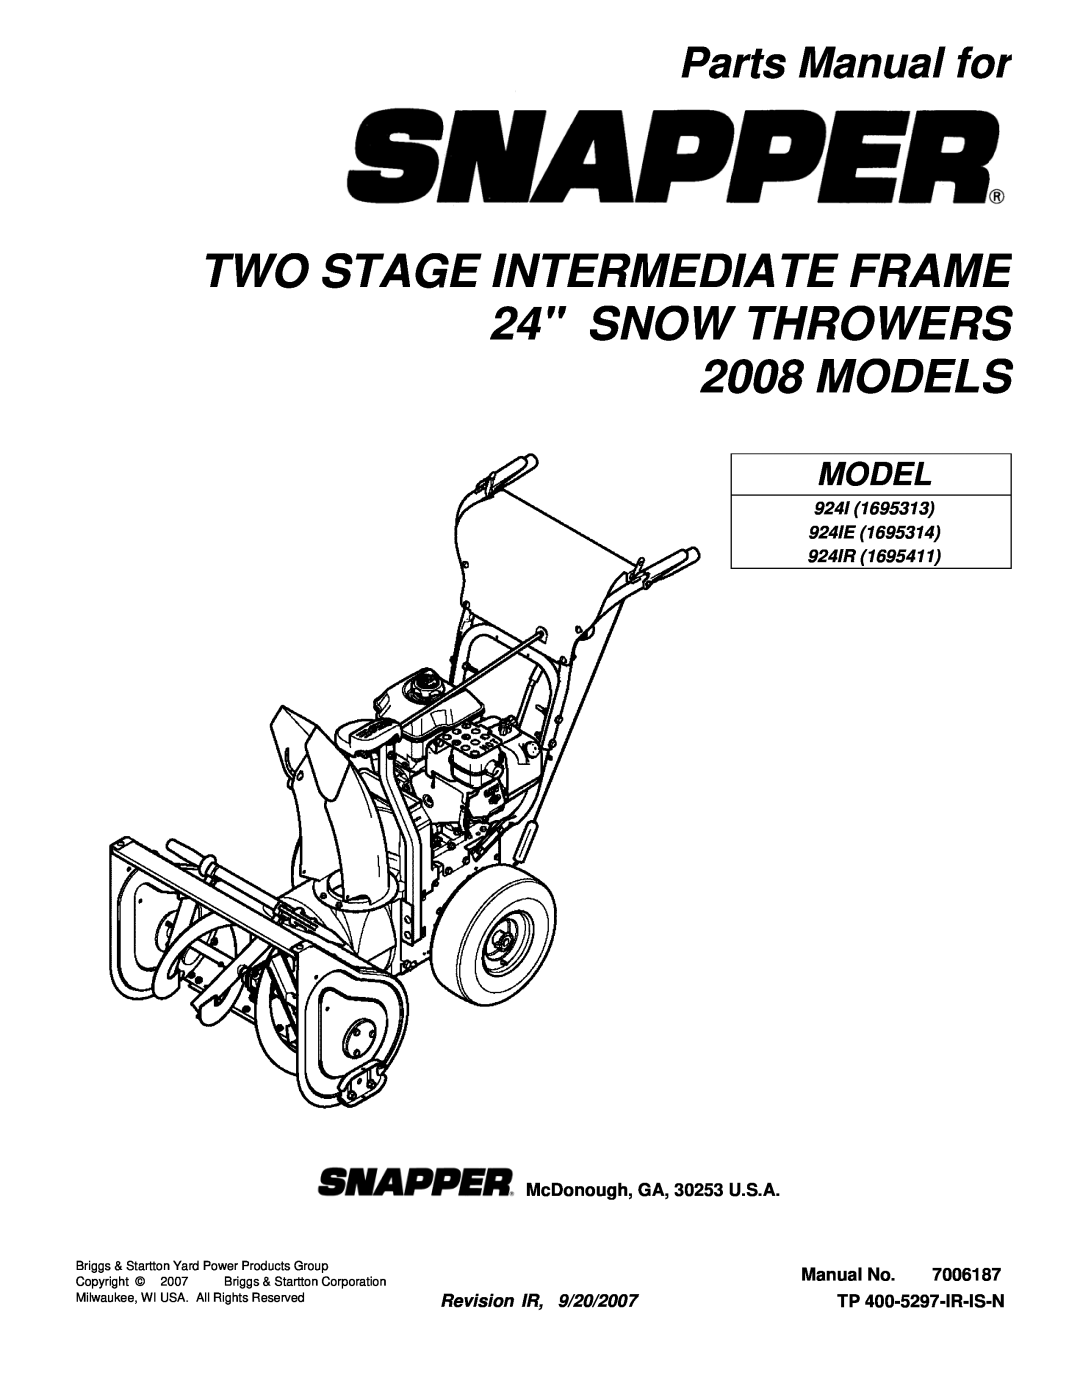 Snapper manual Parts Manual for, 924I 1695313 924IE 1695314 924IR, Revision IR, 9/20/2007, Model 